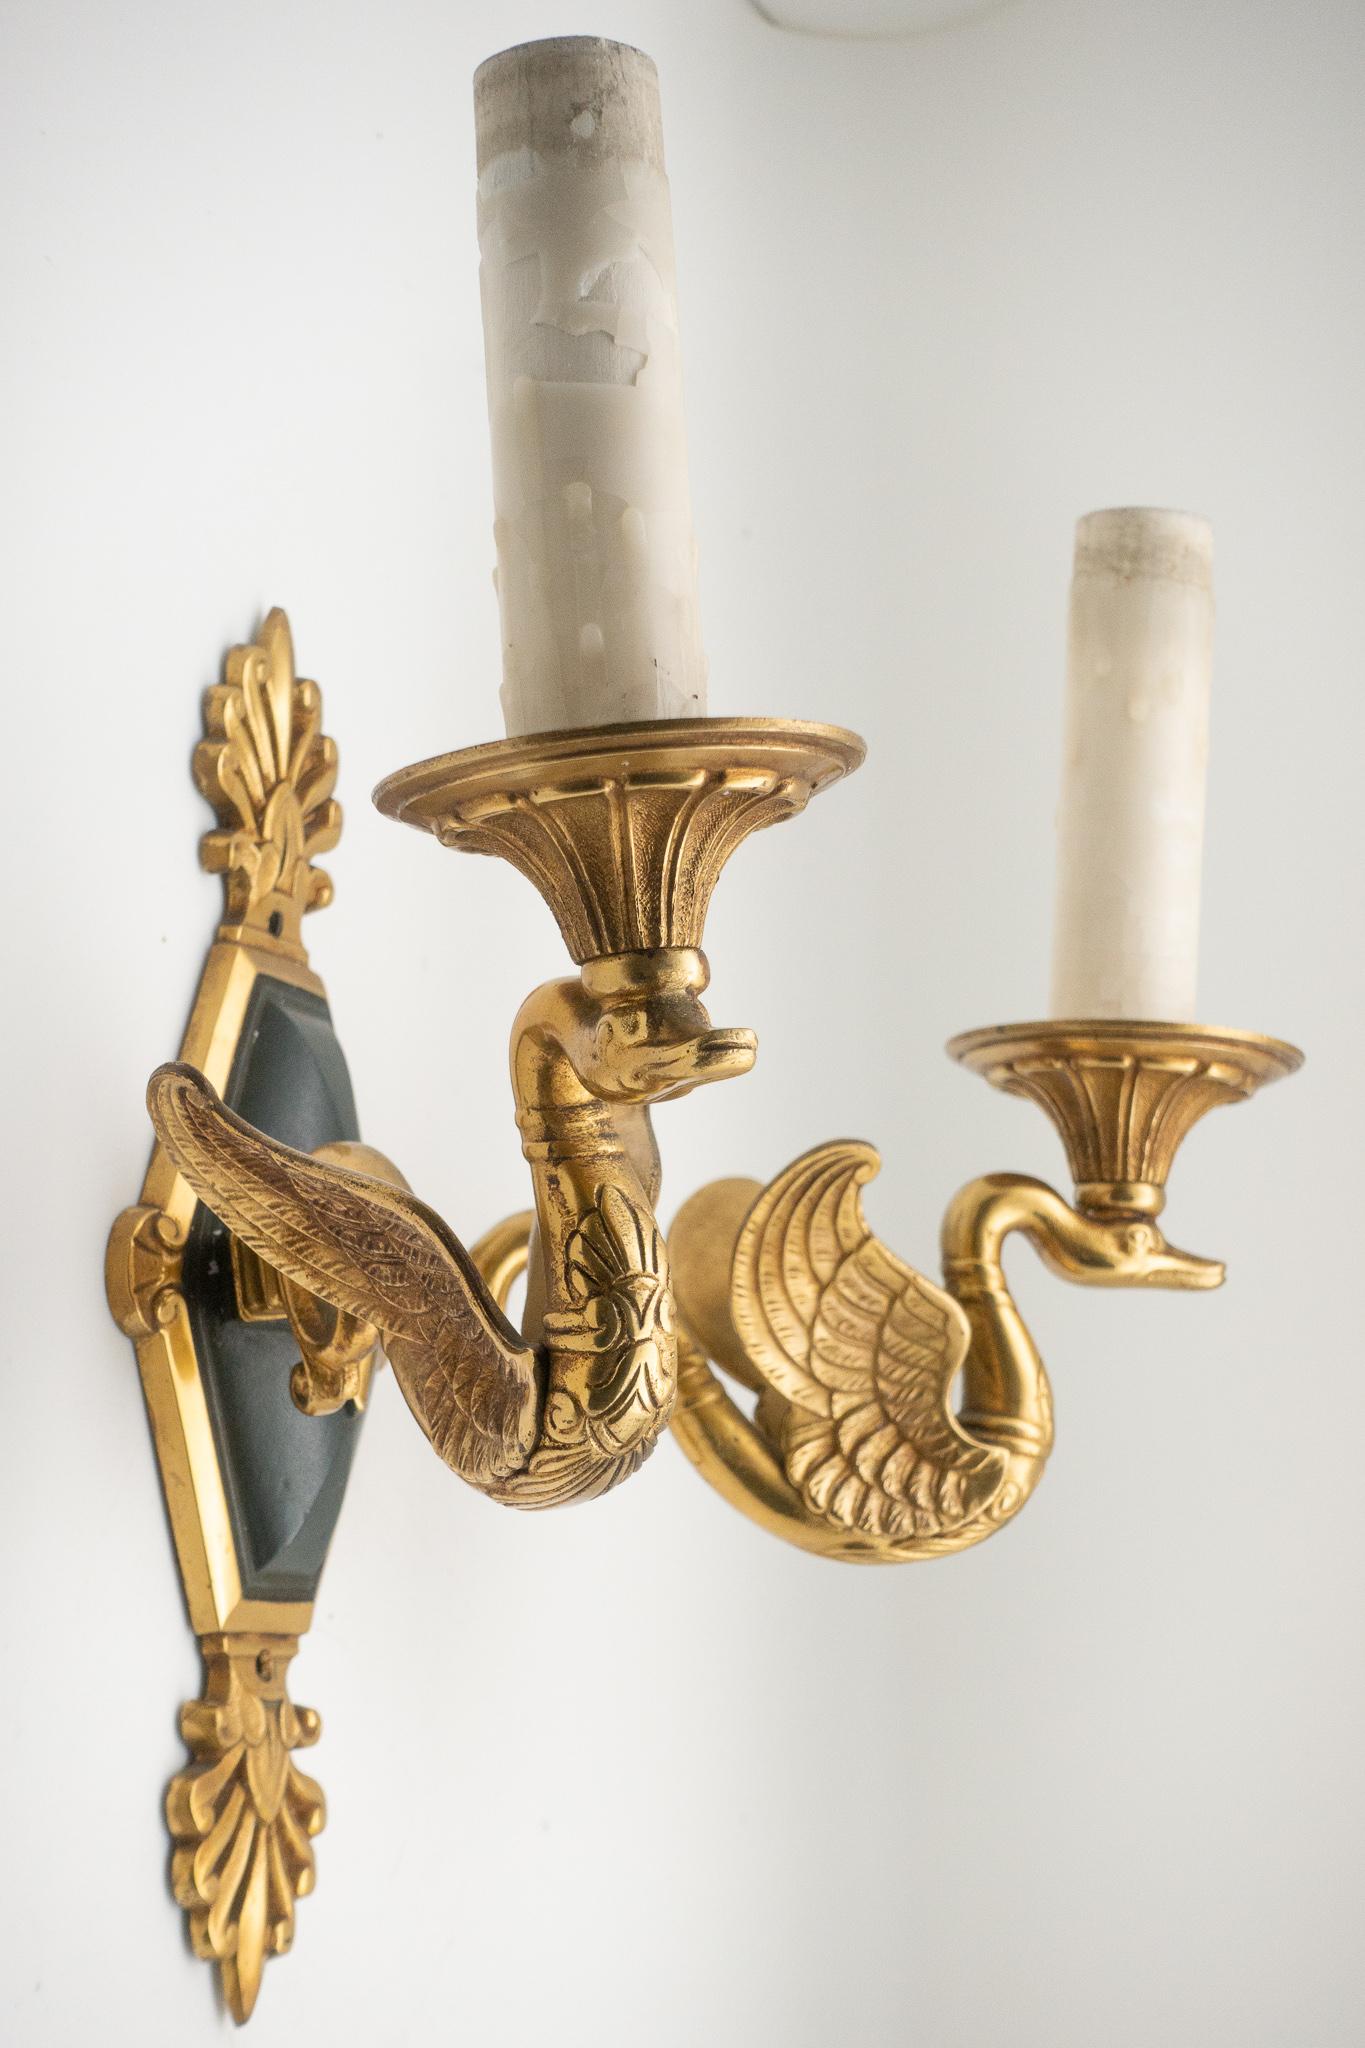 Pair of French 1940s bronze empire style swan sconces. We have 3 pairs available. Measures: 11.5